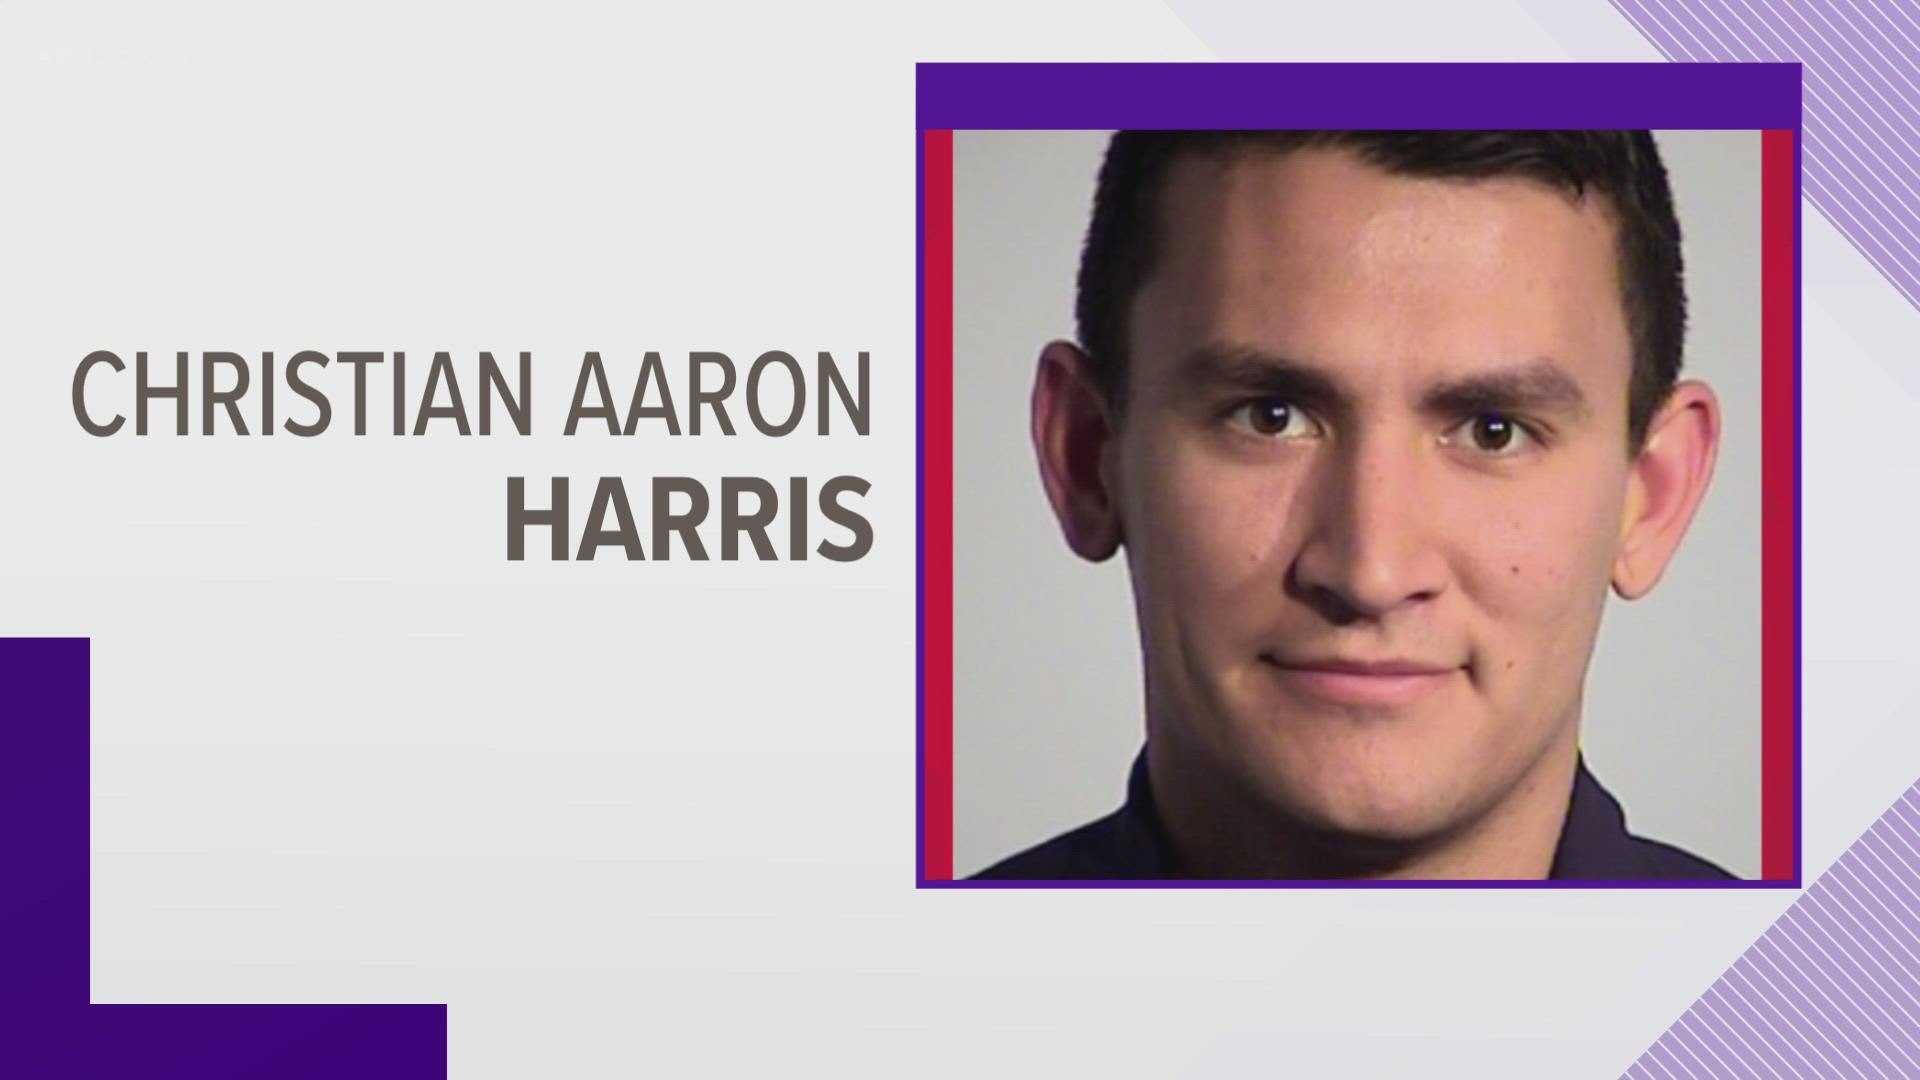 The officer has been identified as Christian Aaron Harris. He has been with the department for five years.